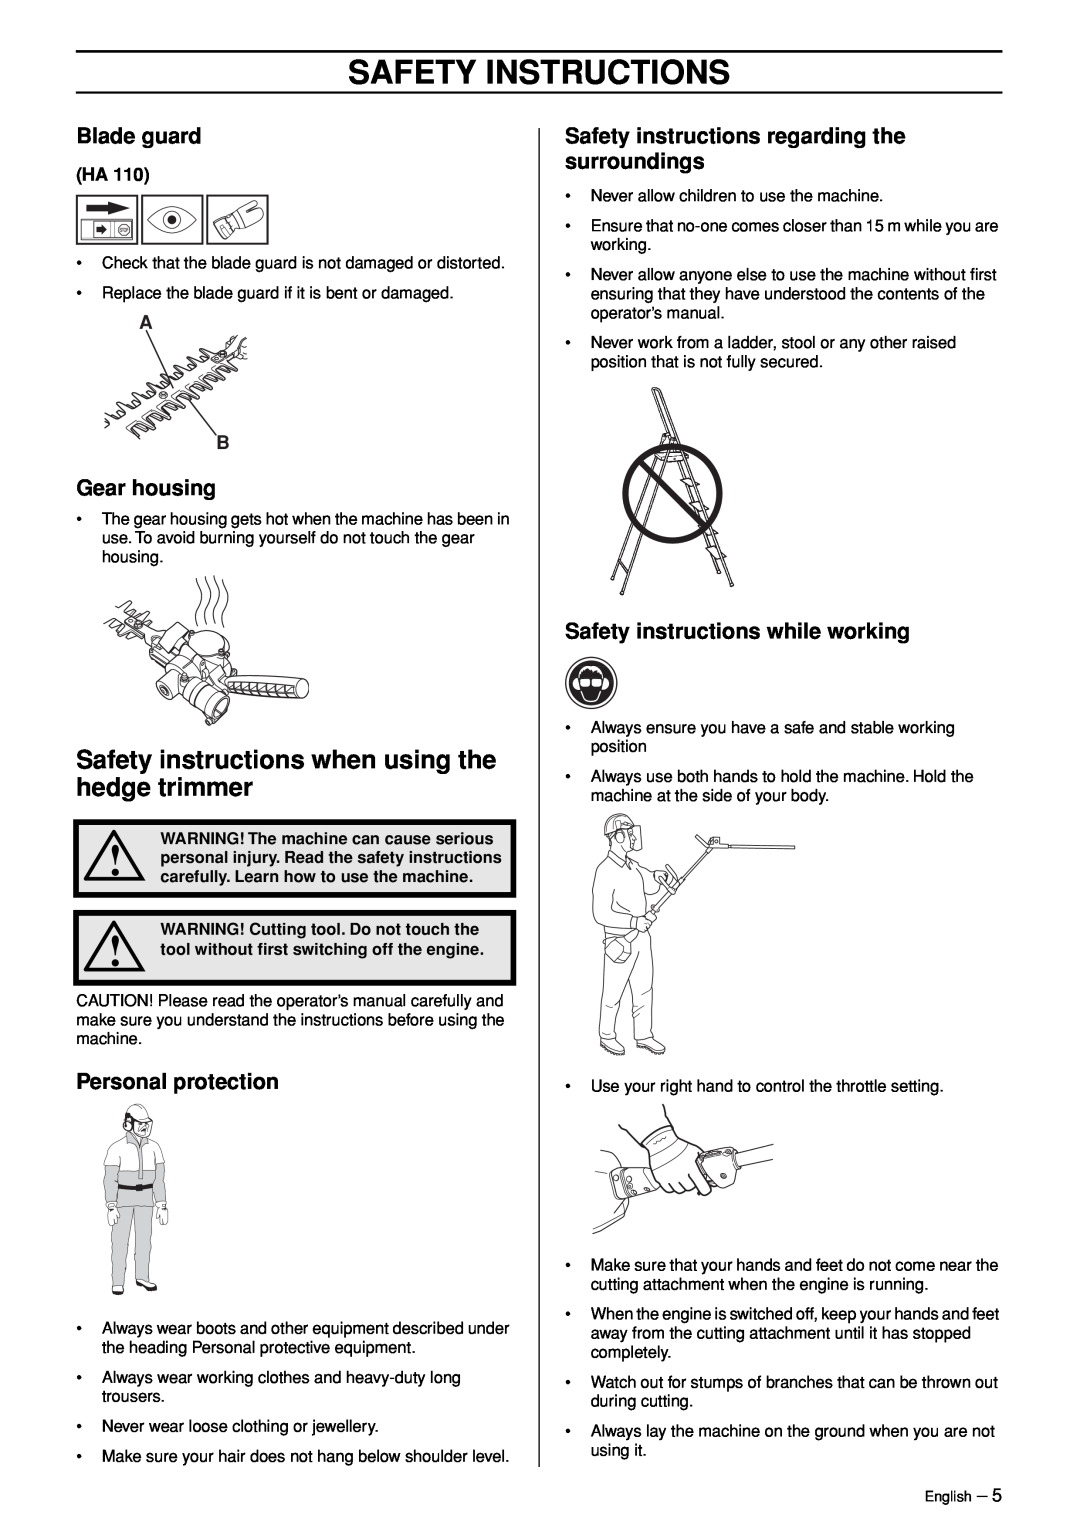 Husqvarna HA 110, HA 110 Safety instructions when using the hedge trimmer, Gear housing, Personal protection, Blade guard 